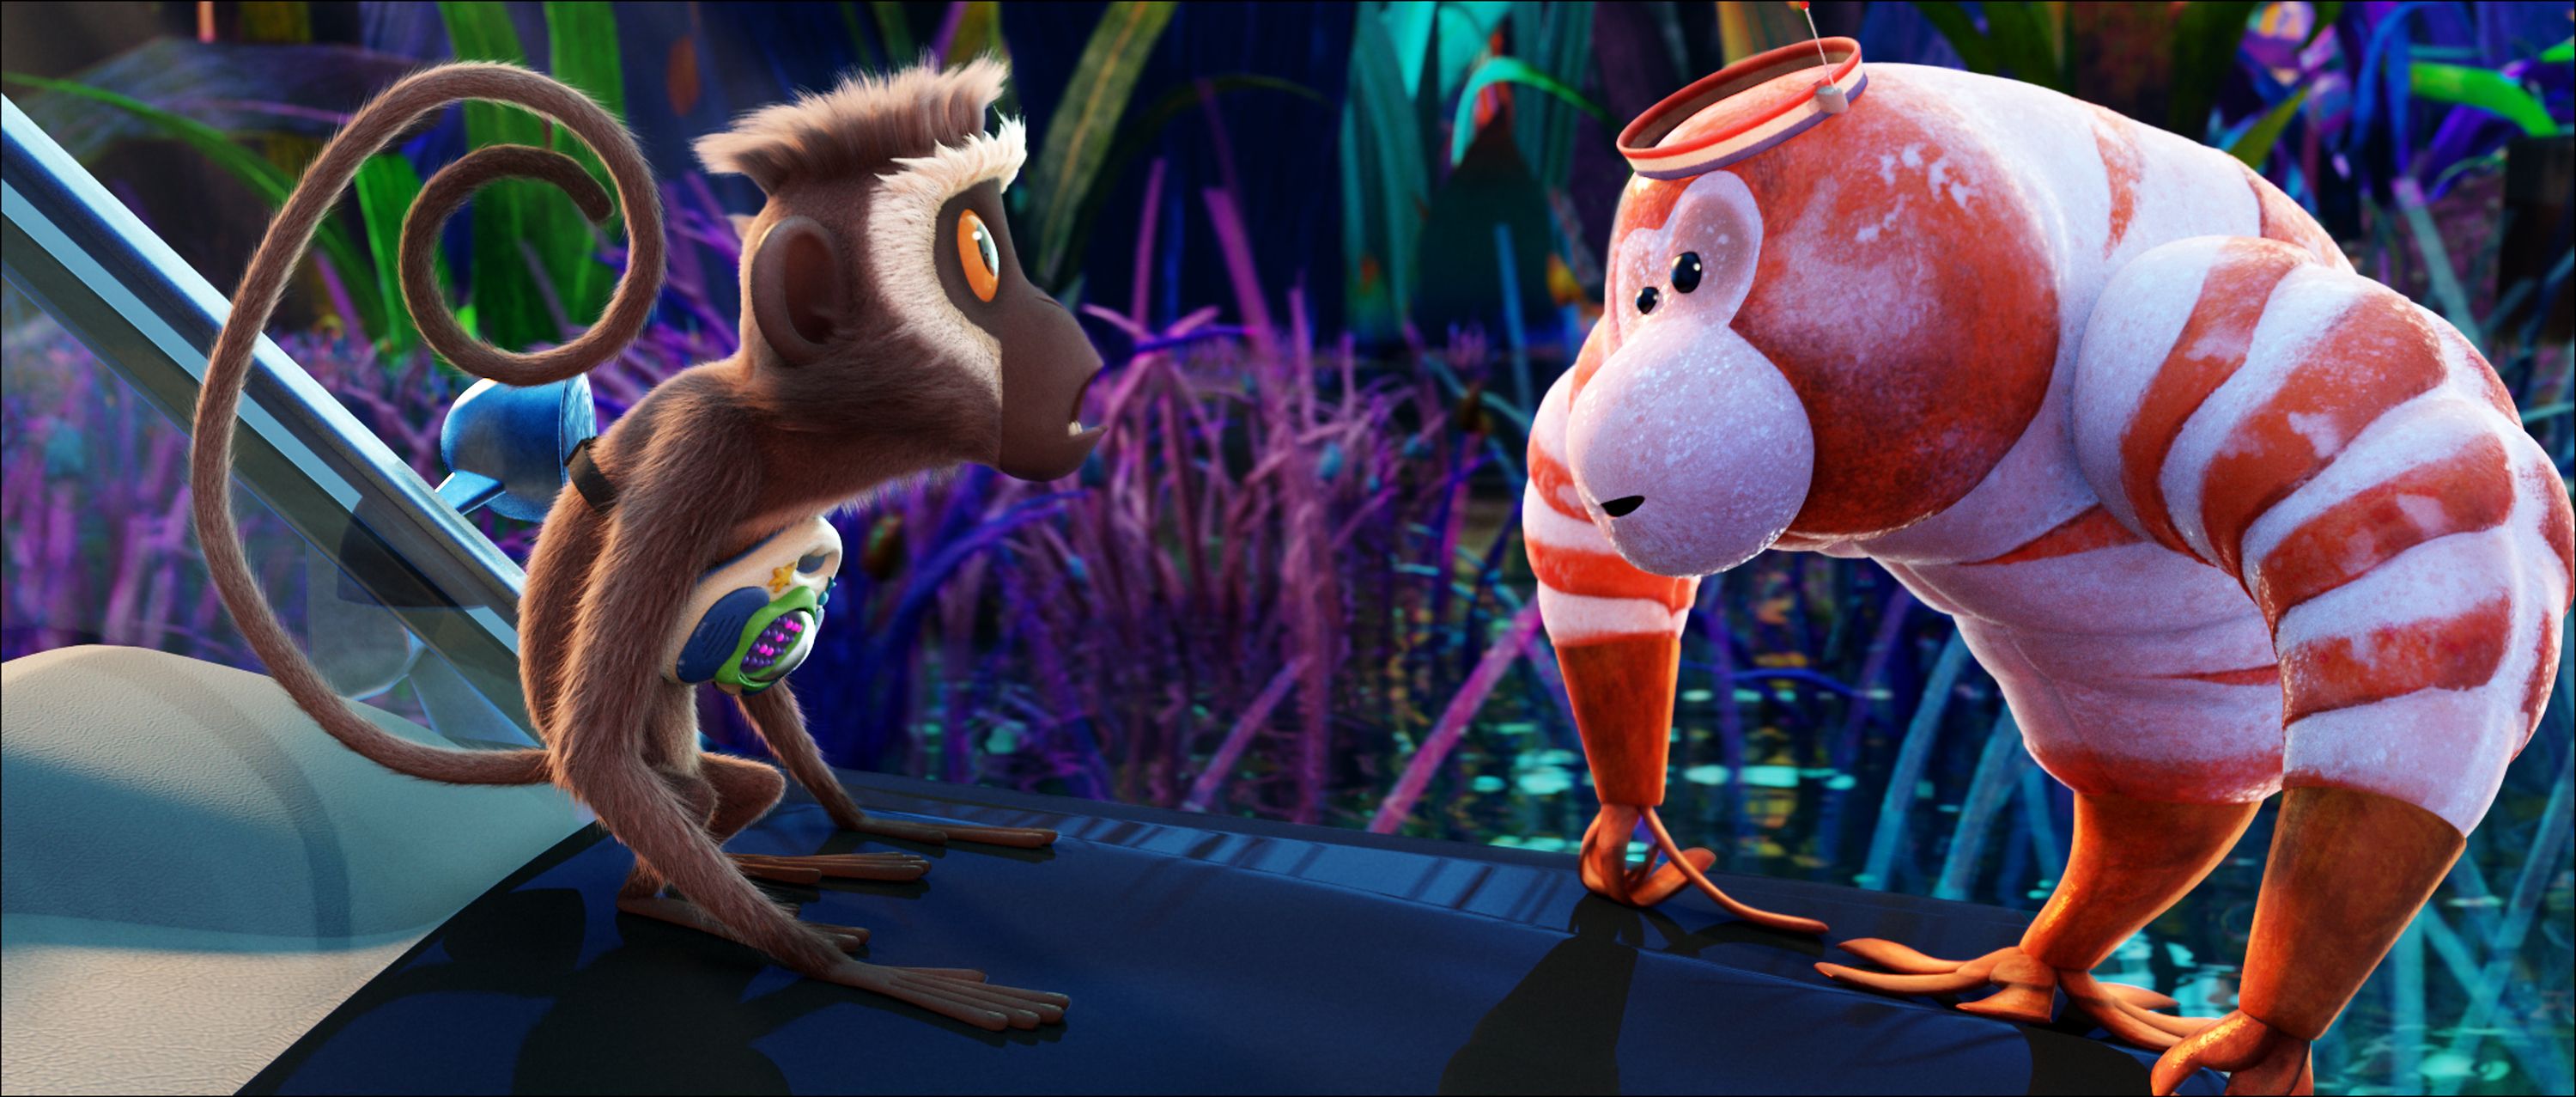 Cloudy with a Chance of Meatballs 2 Photo 8